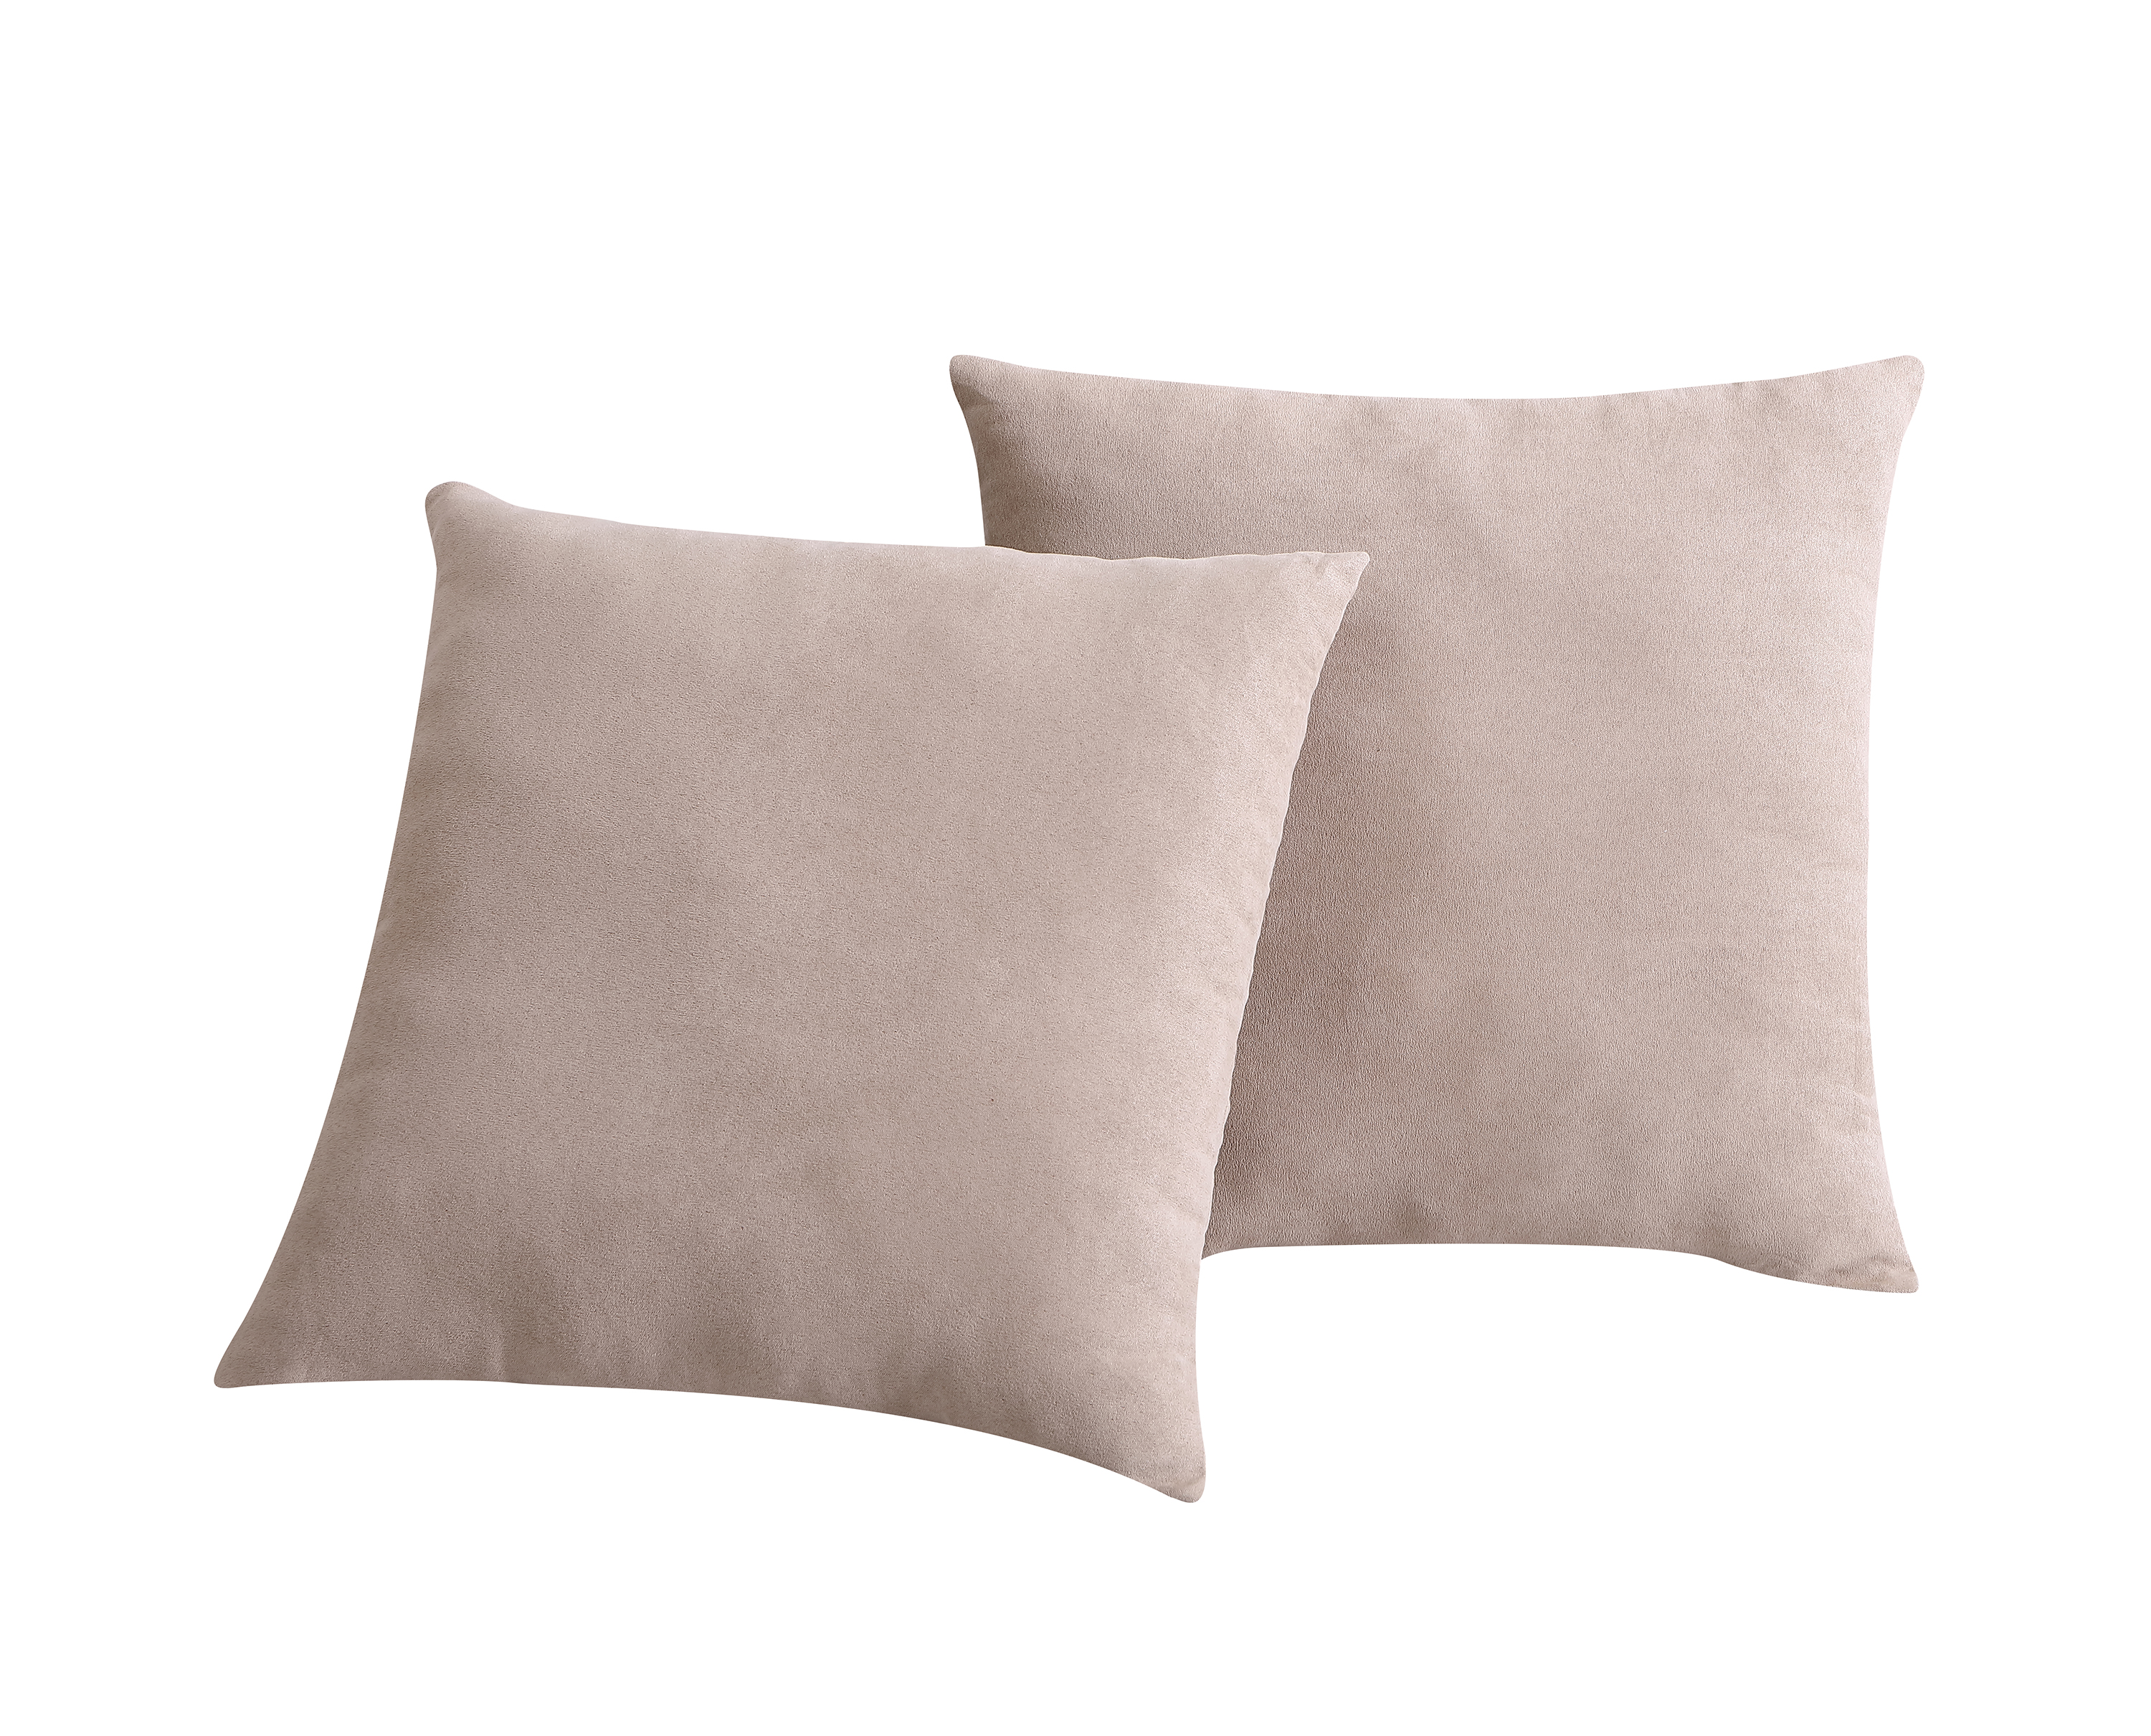 Essential Home 2-Pk. Faux Suede Pillows